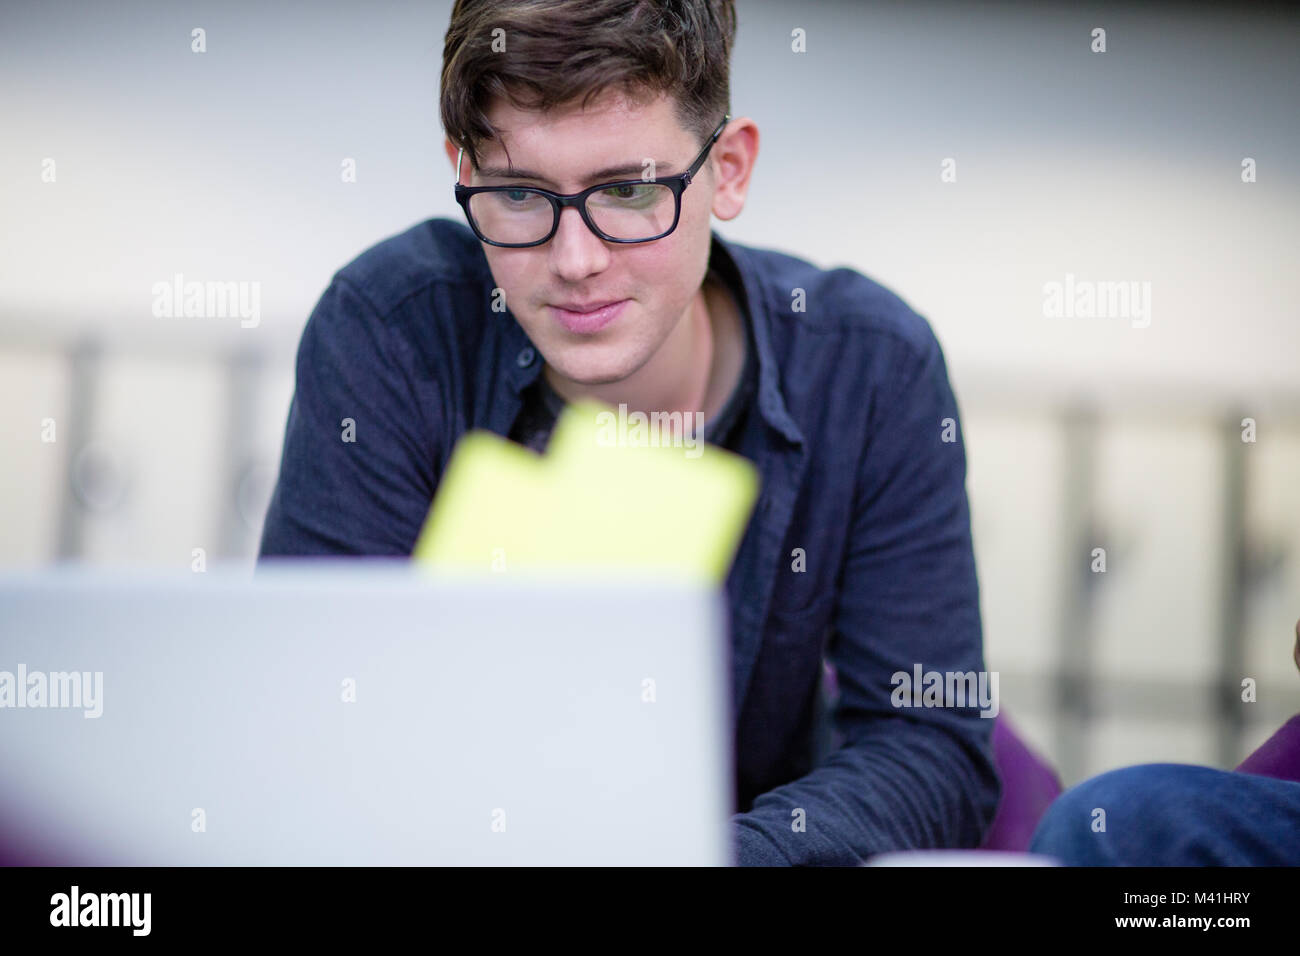 Student revising at college Stock Photo